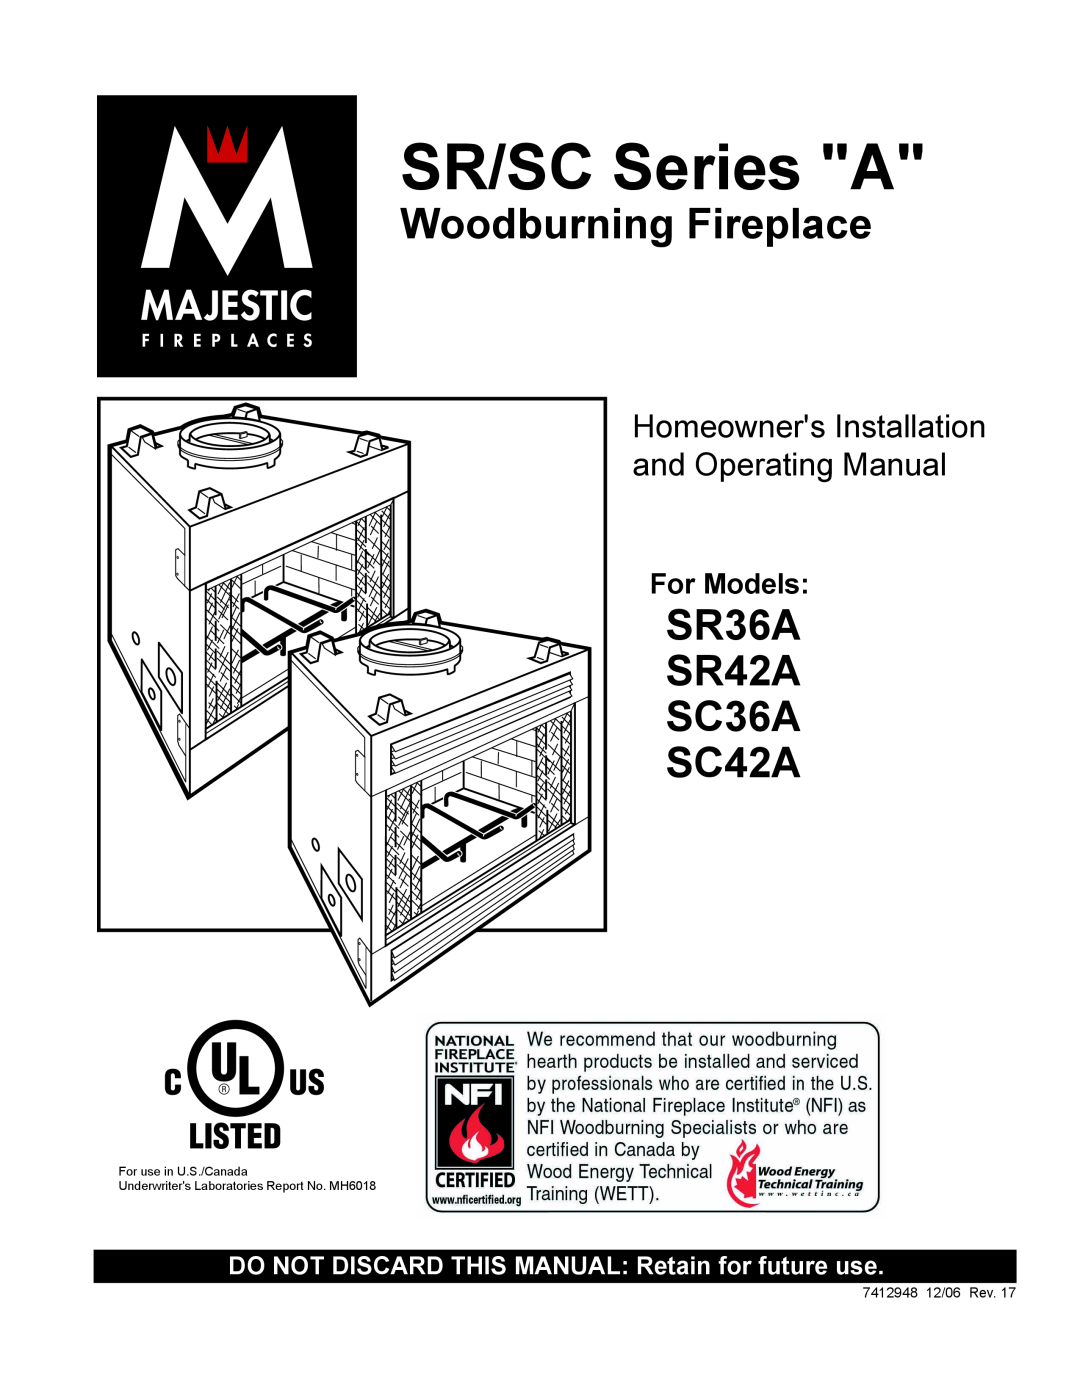 Vermont Casting manual Woodburning Fireplace, SR36A SR42A SC36A SC42A, DO NOT DISCARD THIS MANUAL Retain for future use 